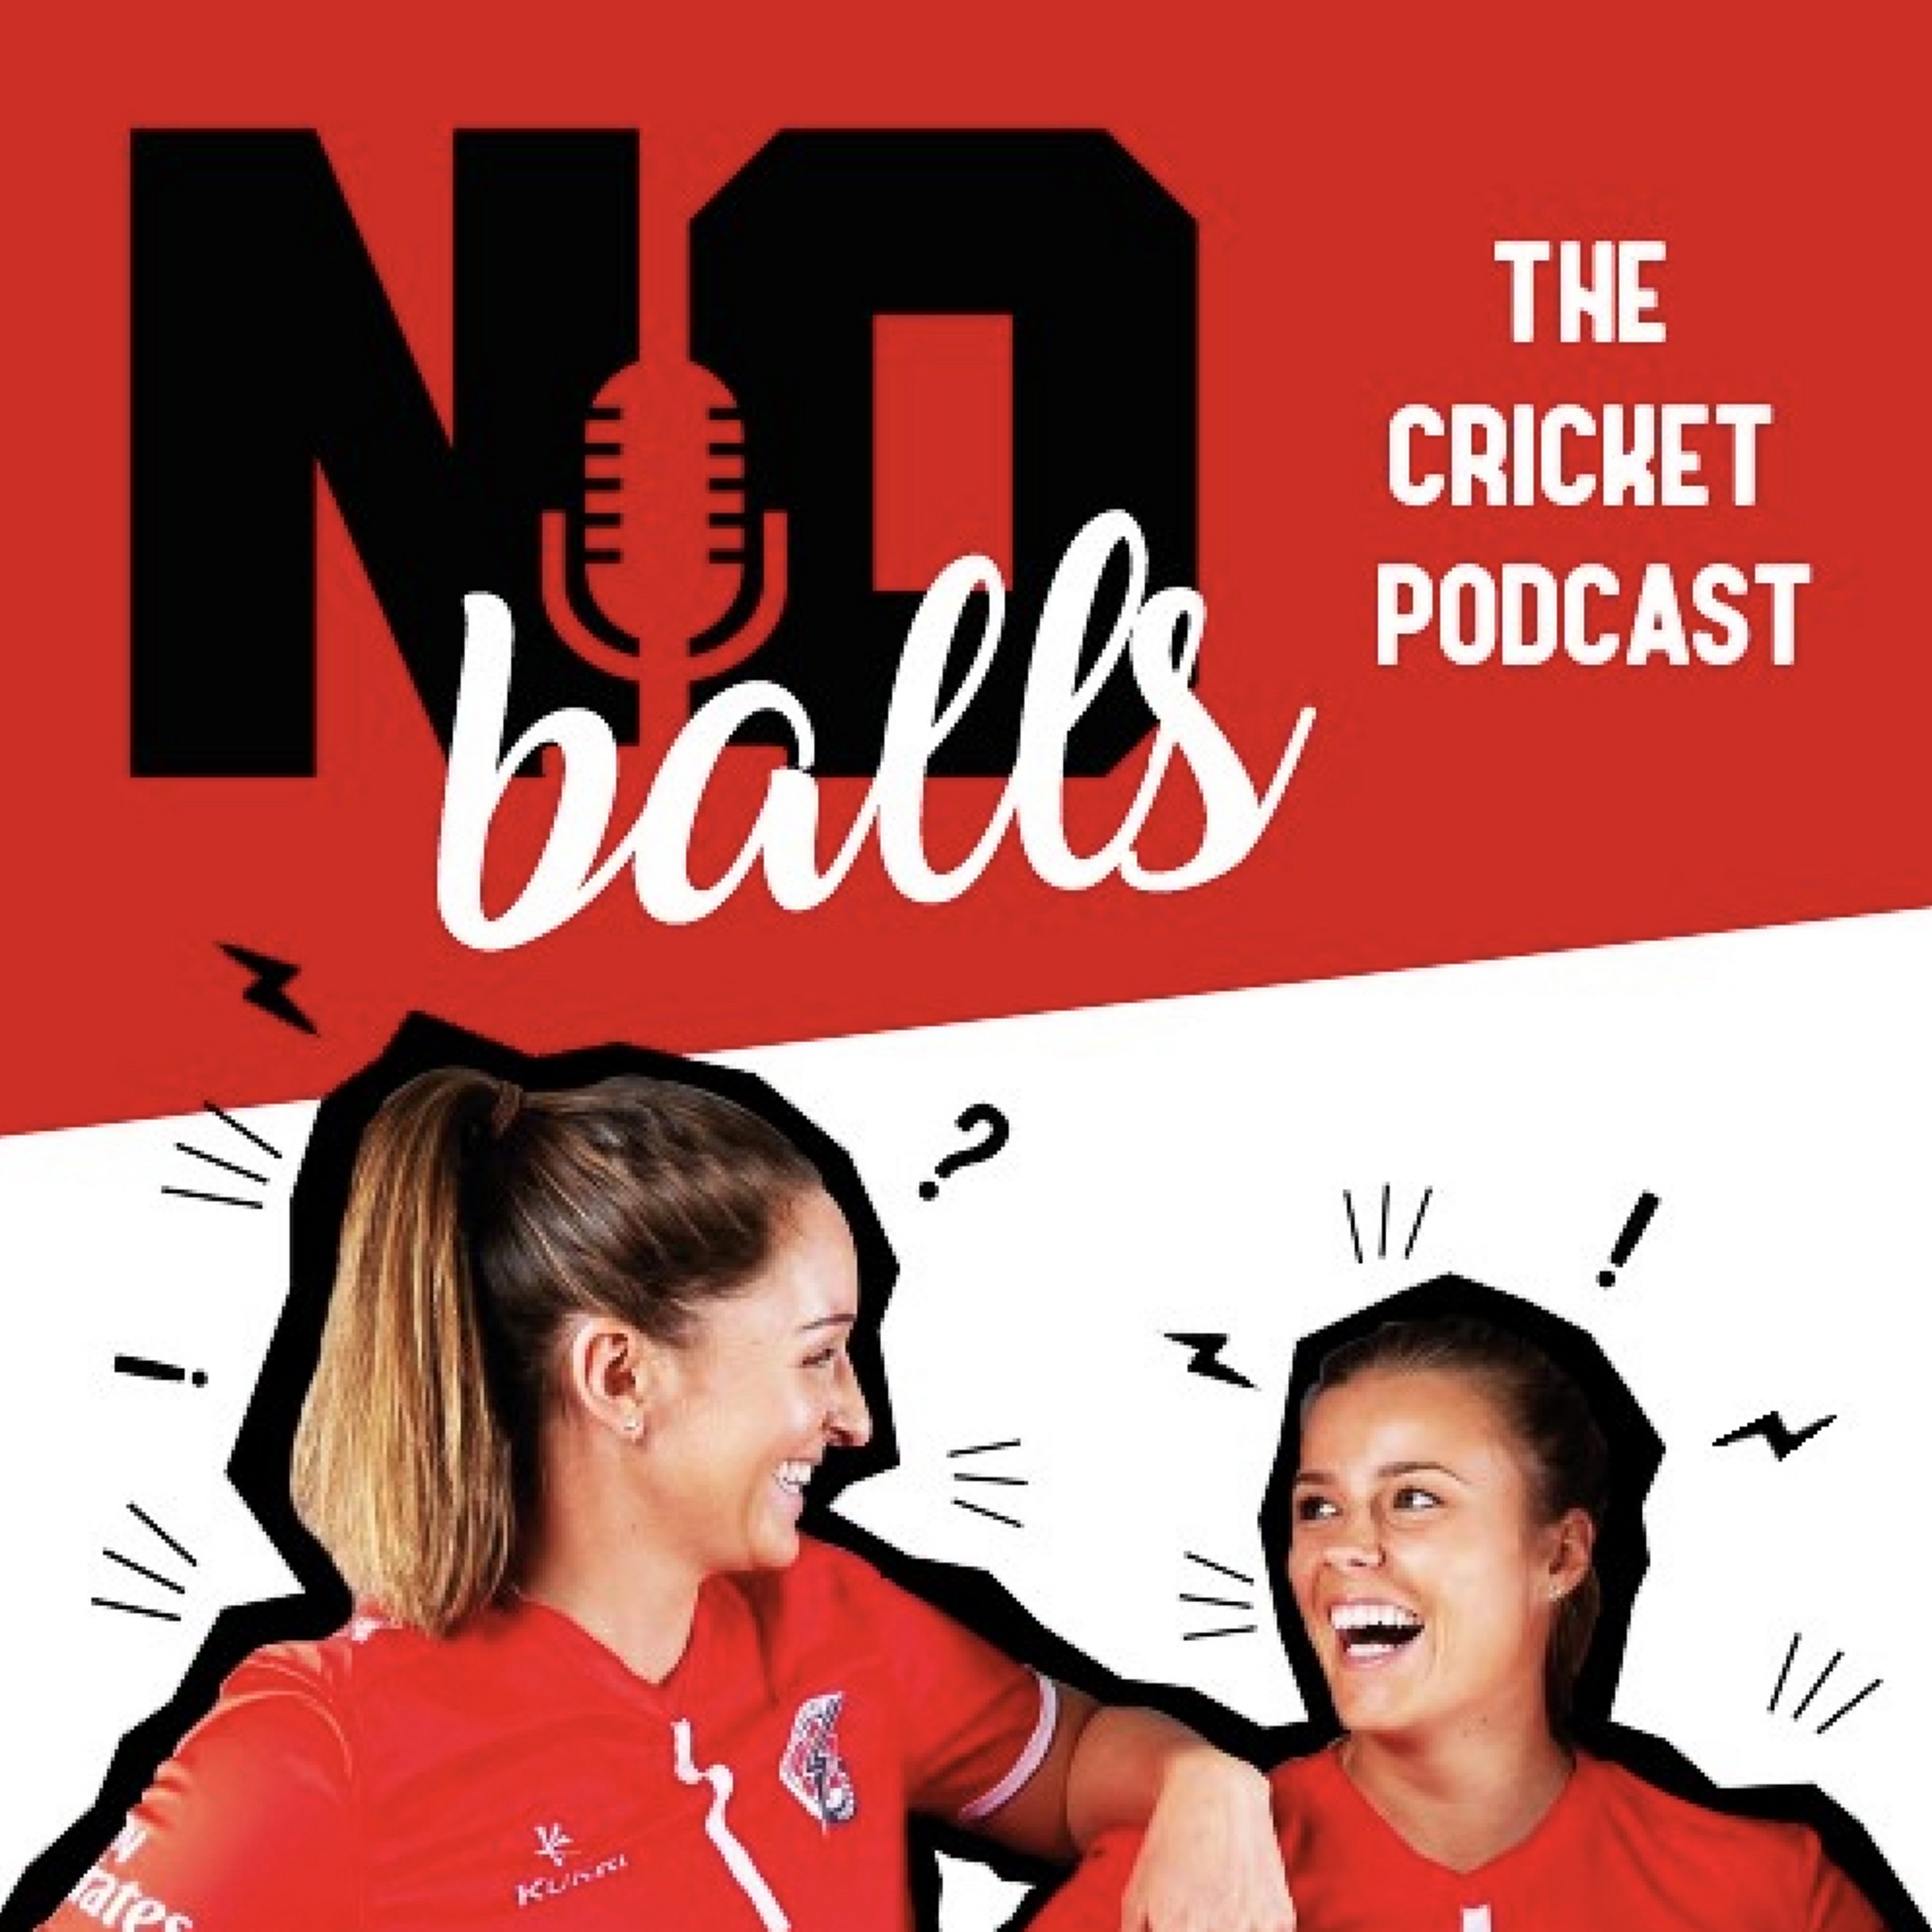 No Balls: The Cricket Podcast - Alex doesn't know how to hold a mug